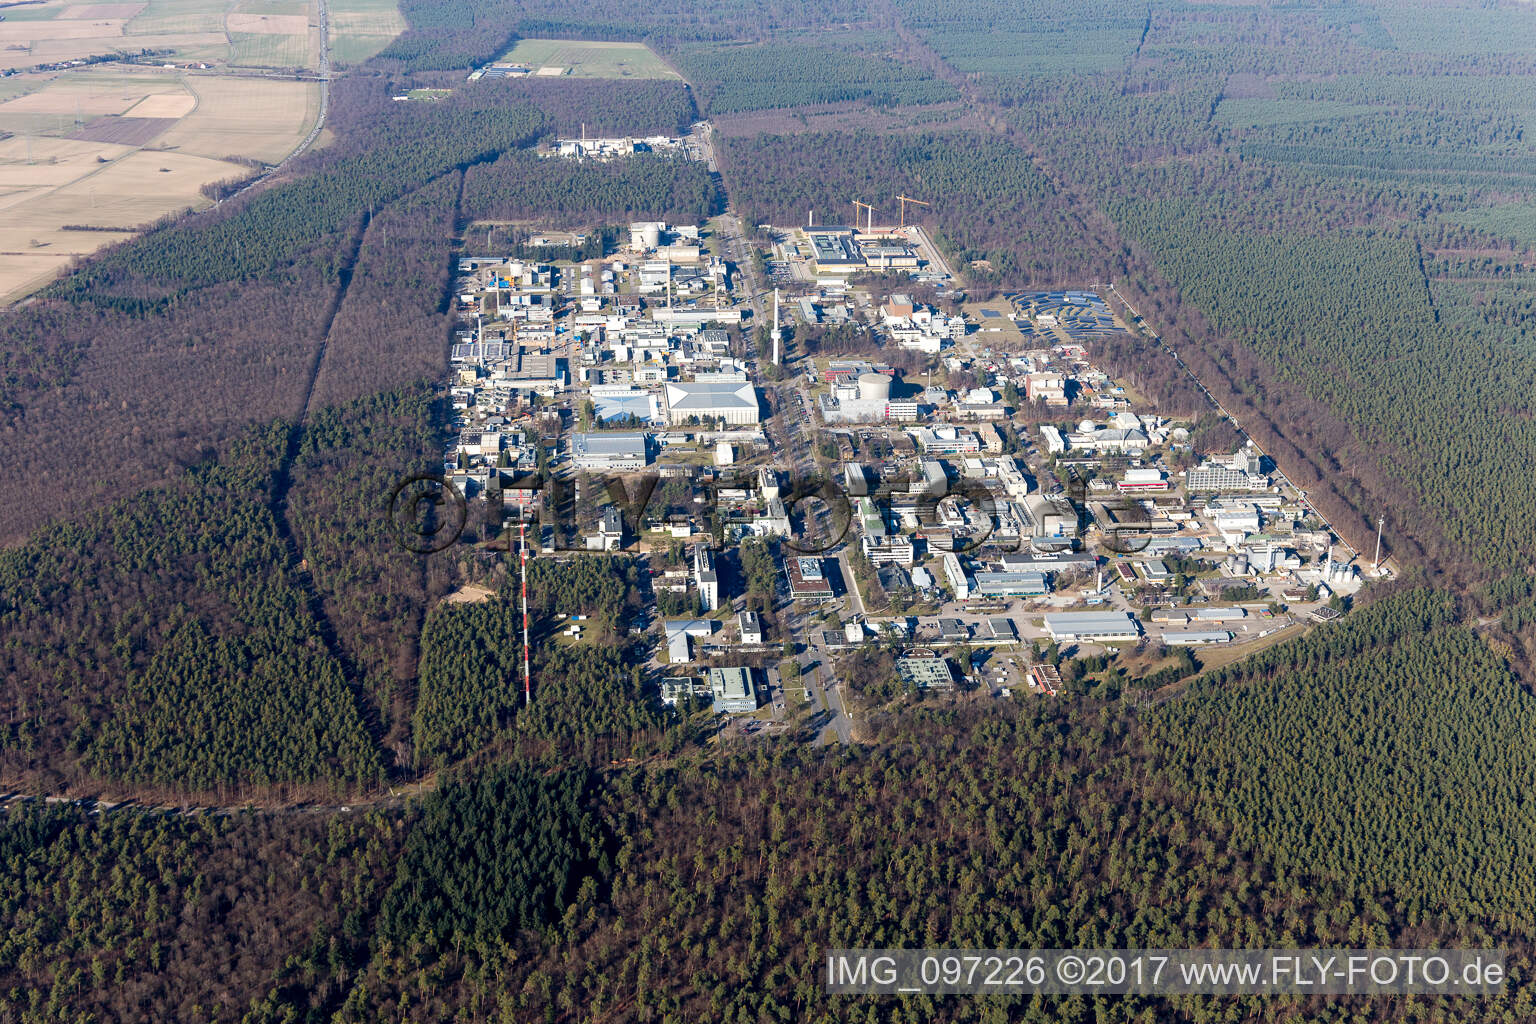 KIT Campus North in the district Leopoldshafen in Eggenstein-Leopoldshafen in the state Baden-Wuerttemberg, Germany viewn from the air